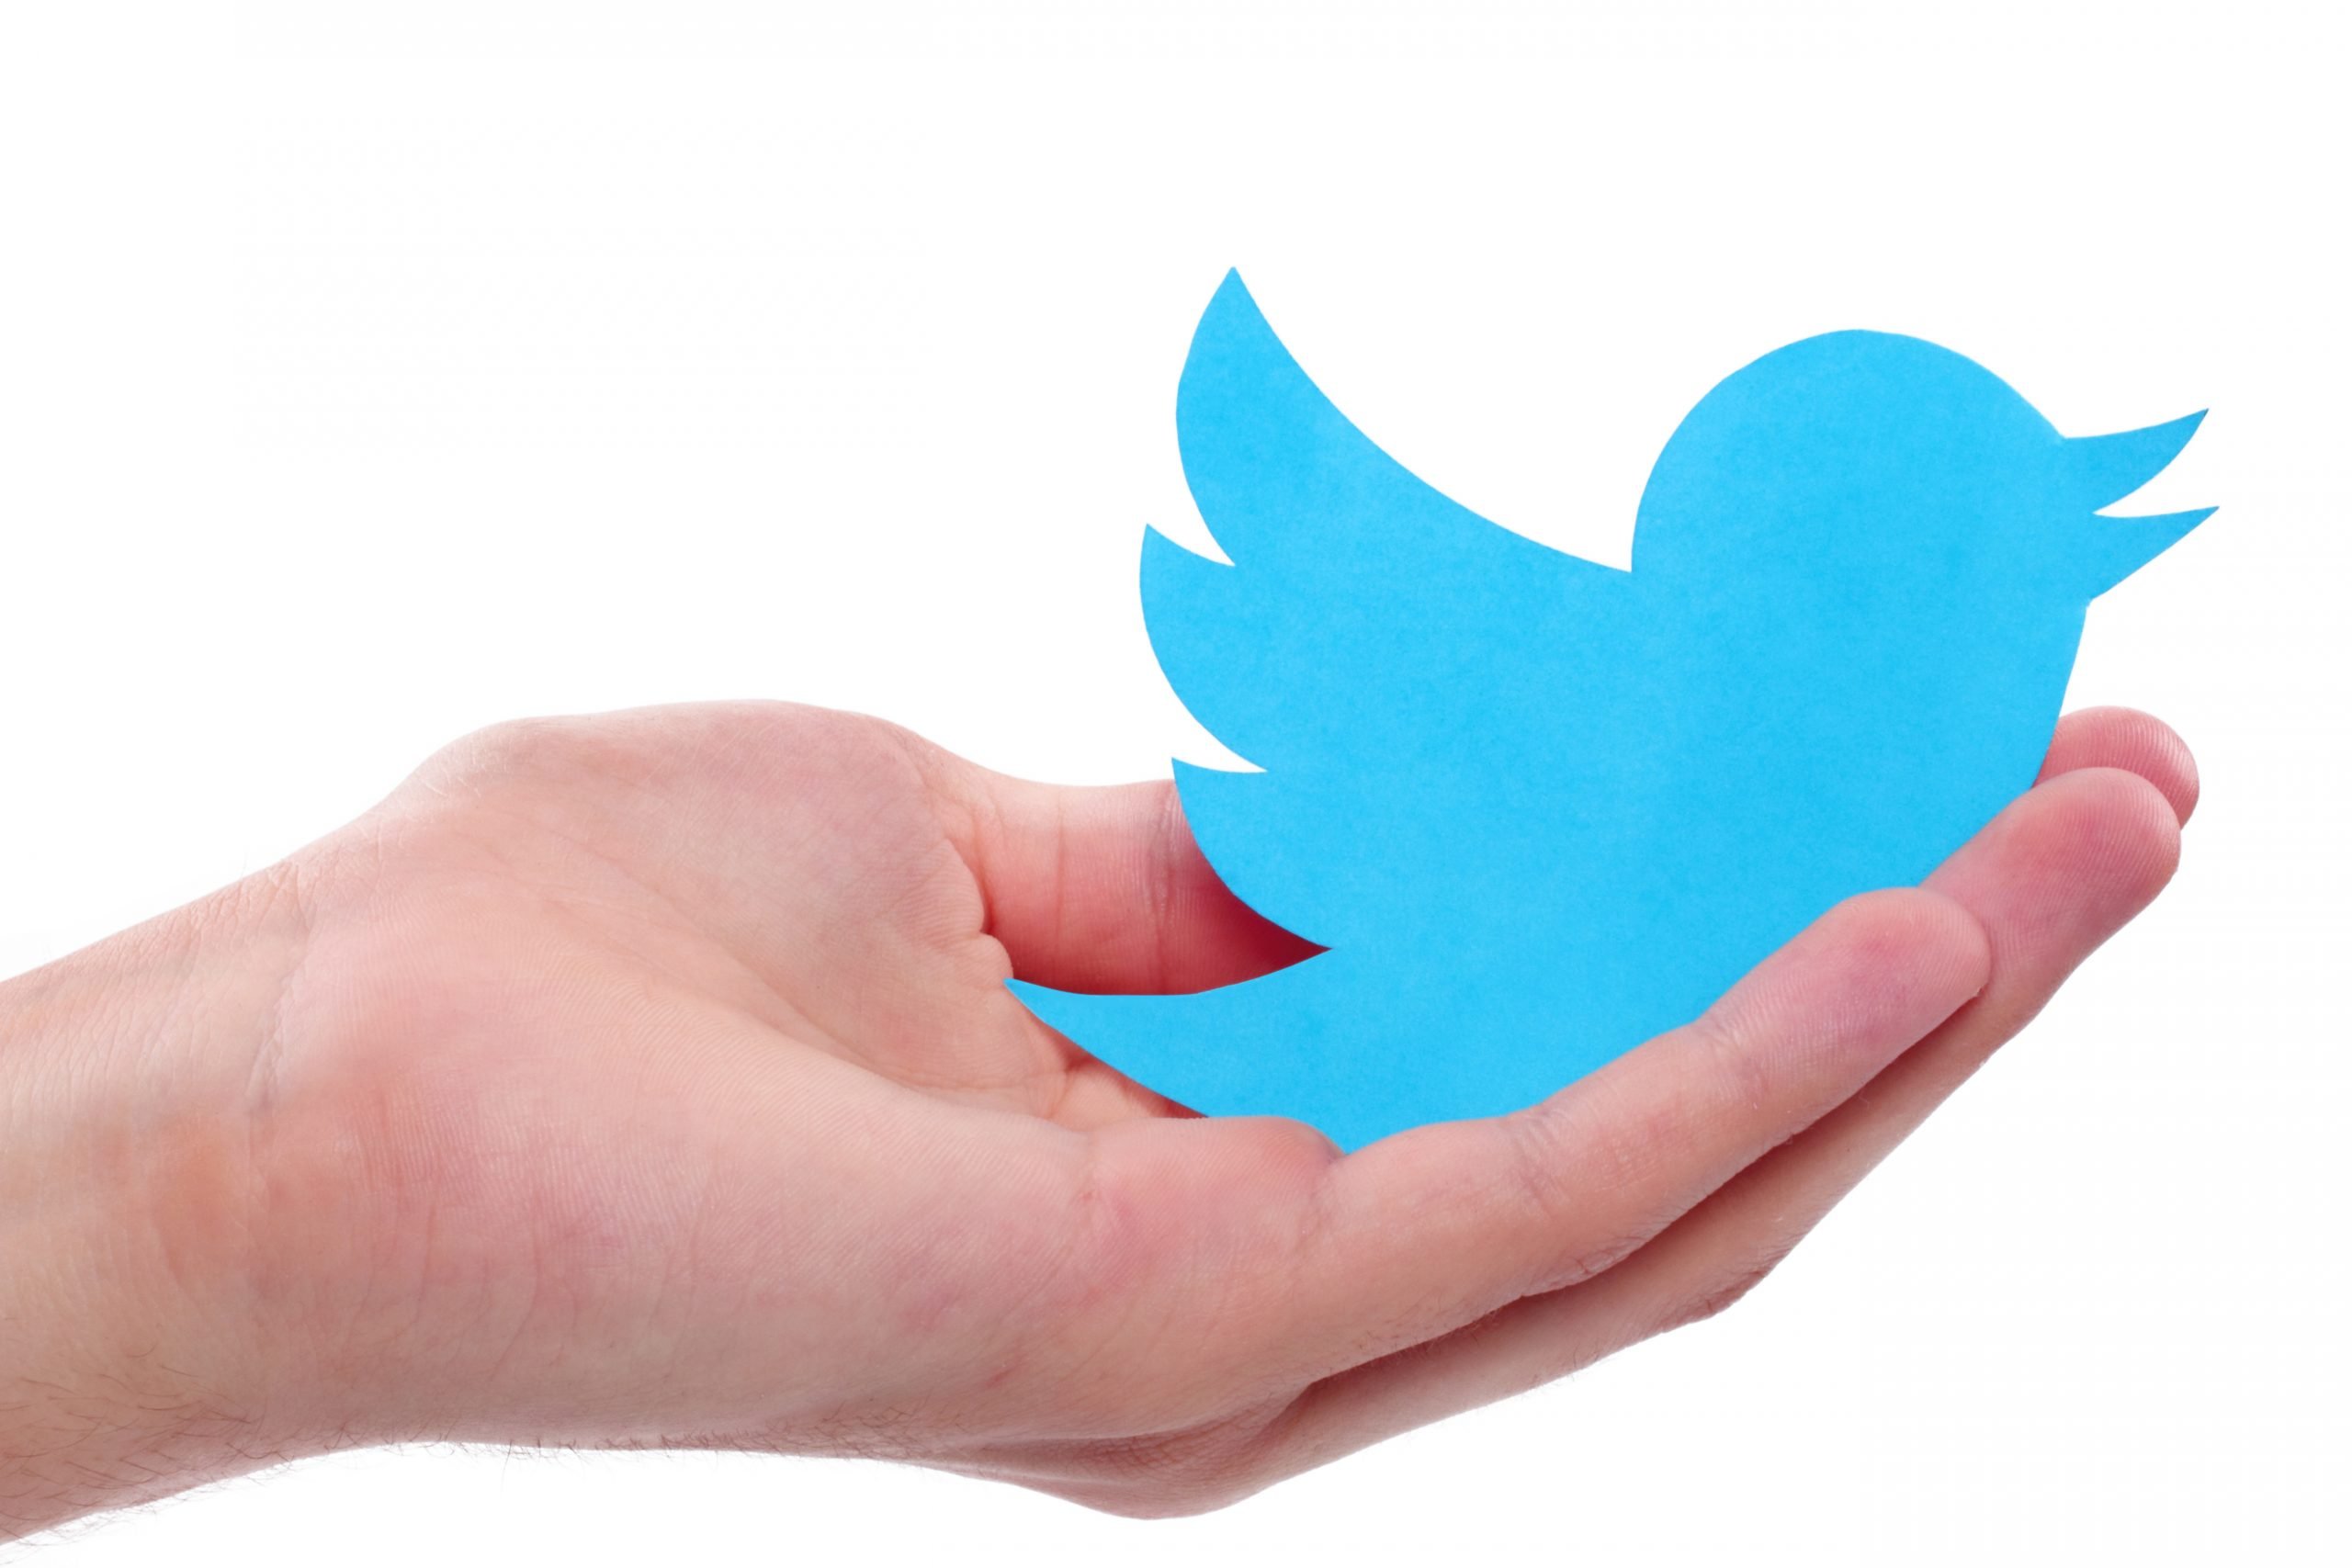 A hand holding a cut-out of the Twitter logo